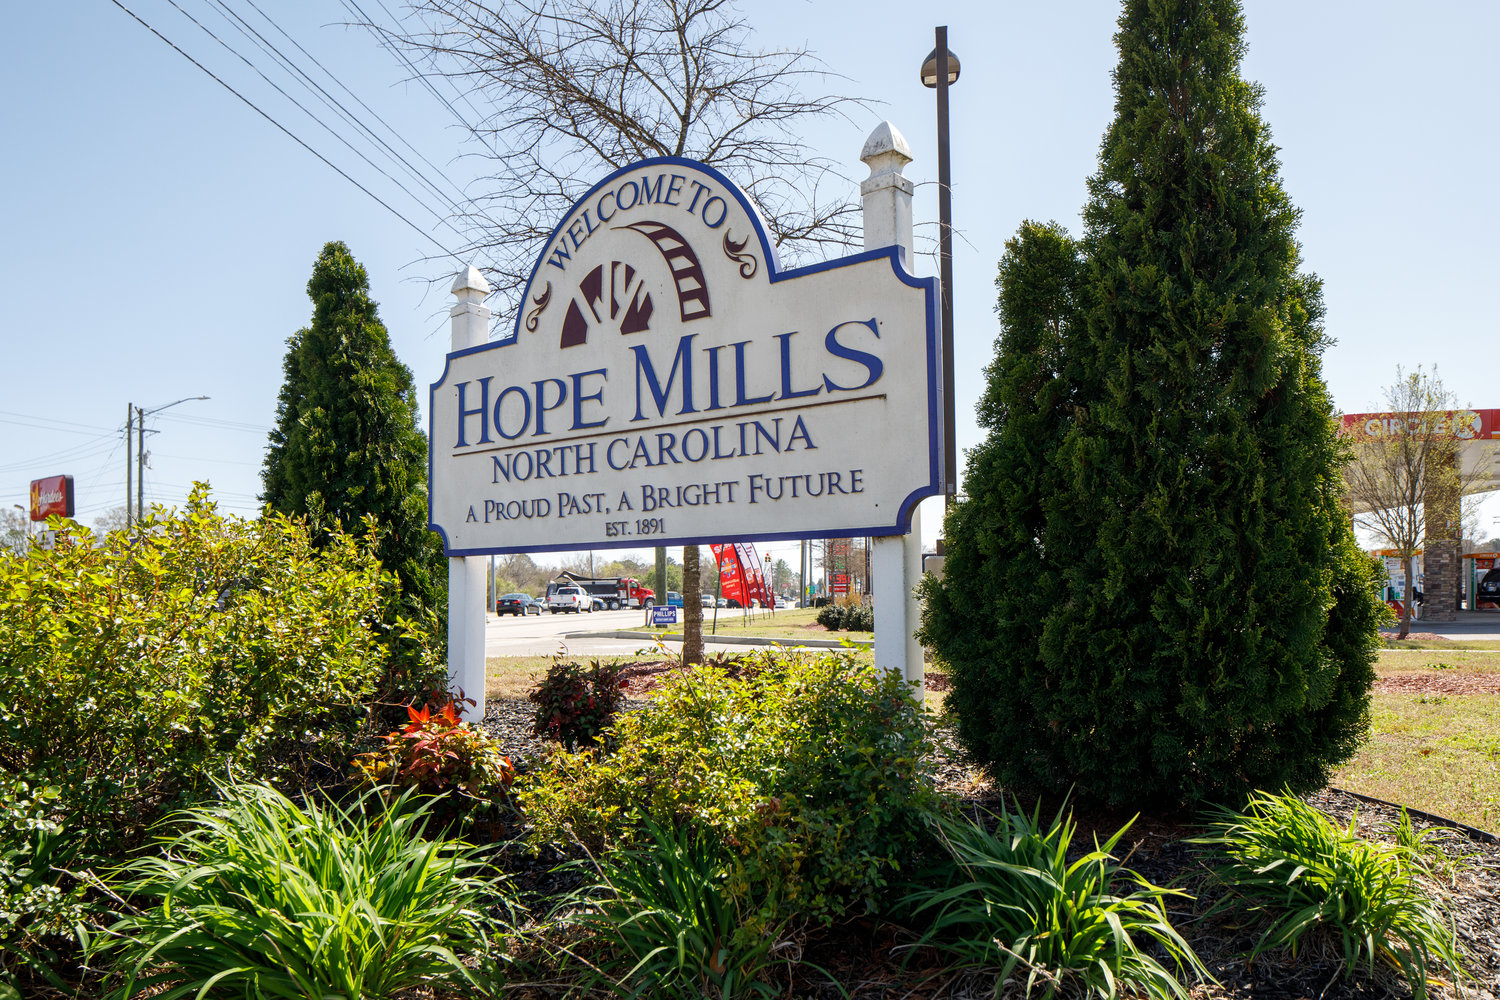 The planning director told the Hope Mills Board of Commissioners on Monday that it may want to consider establishing an overlay zoning district to help guide development in the town.